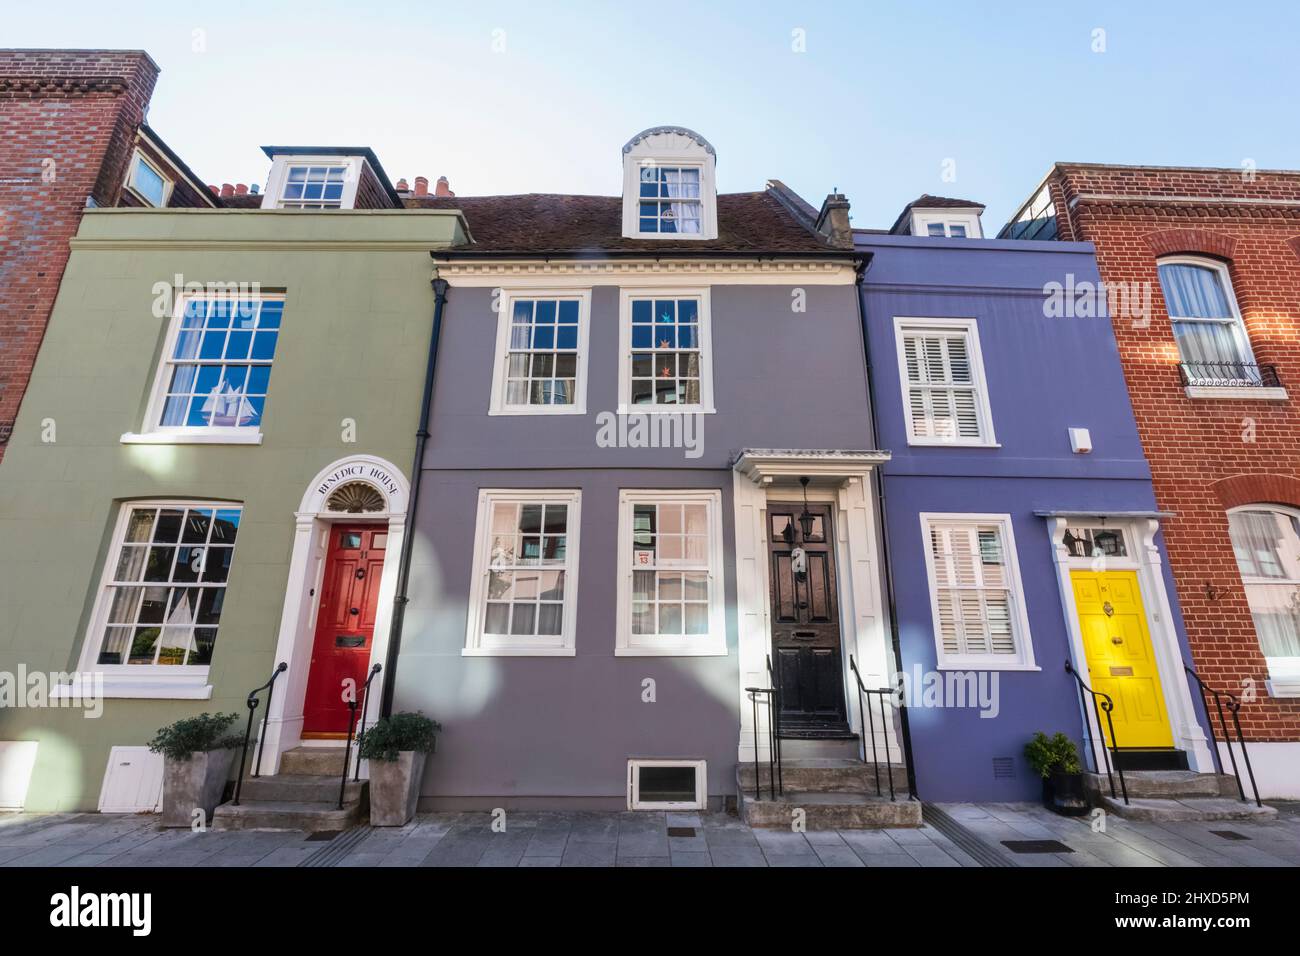 England, Hampshire, Portsmouth, Old Portsmouth, Lombard Street, Colourful Georgian Era Buildings Stock Photo